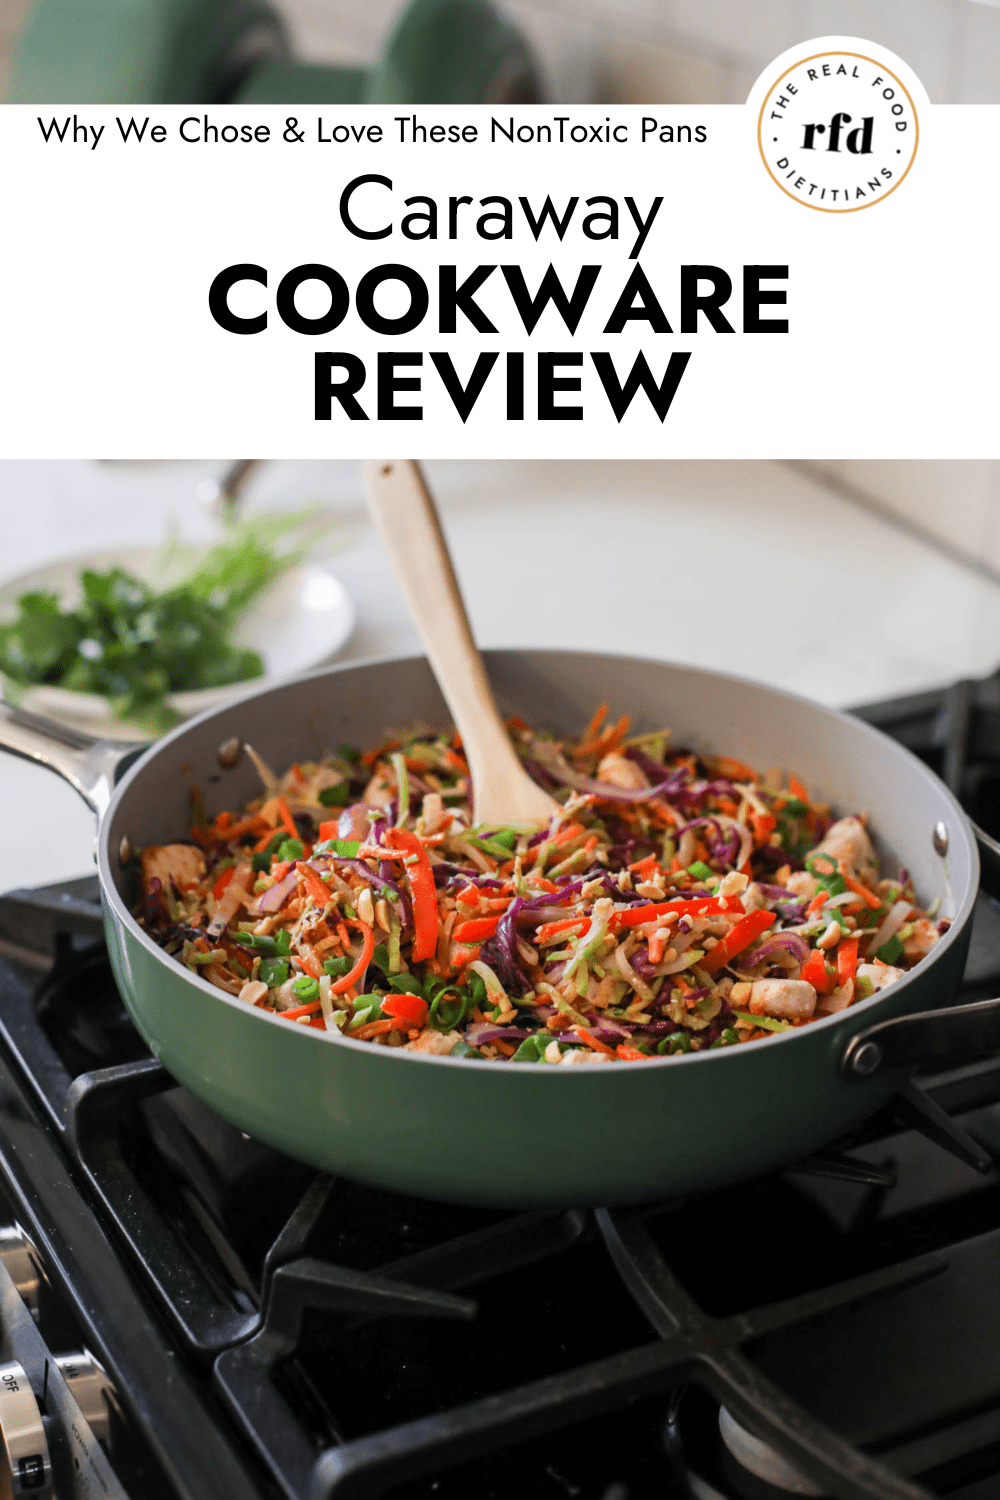 https://therealfooddietitians.com/wp-content/uploads/2023/03/Caraway-Cookware-Review-1000-%C3%97-1500-px.png